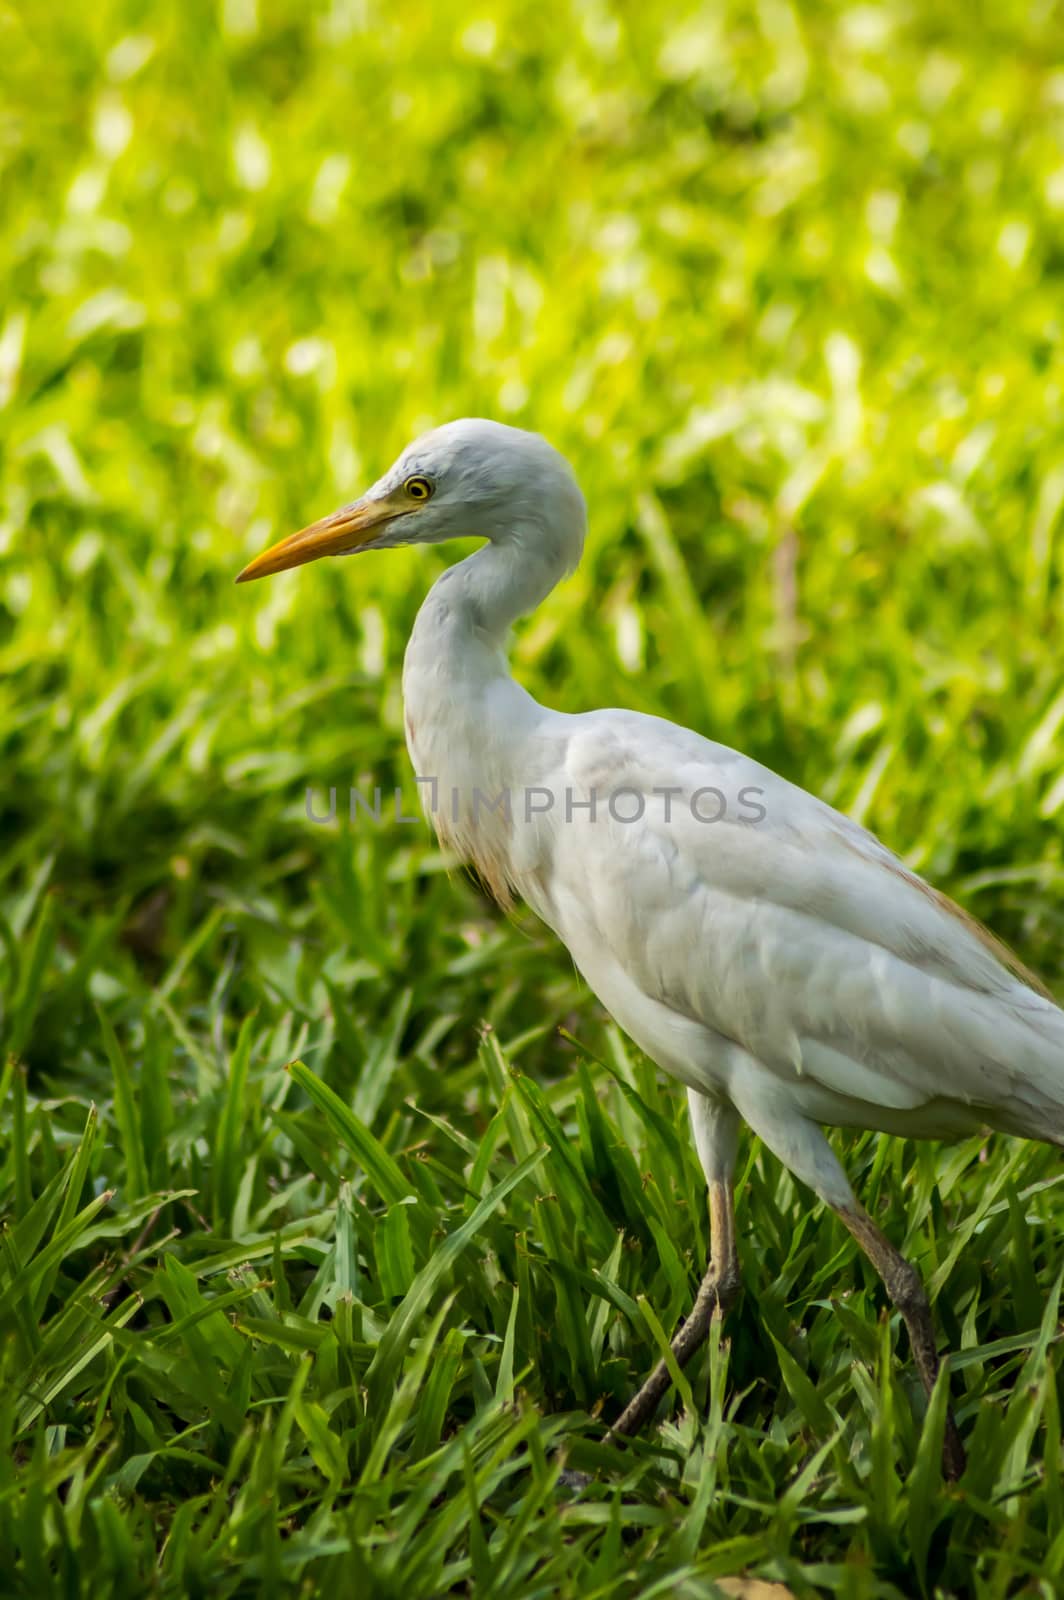 white egret along a forest near Banjul in the Gambia